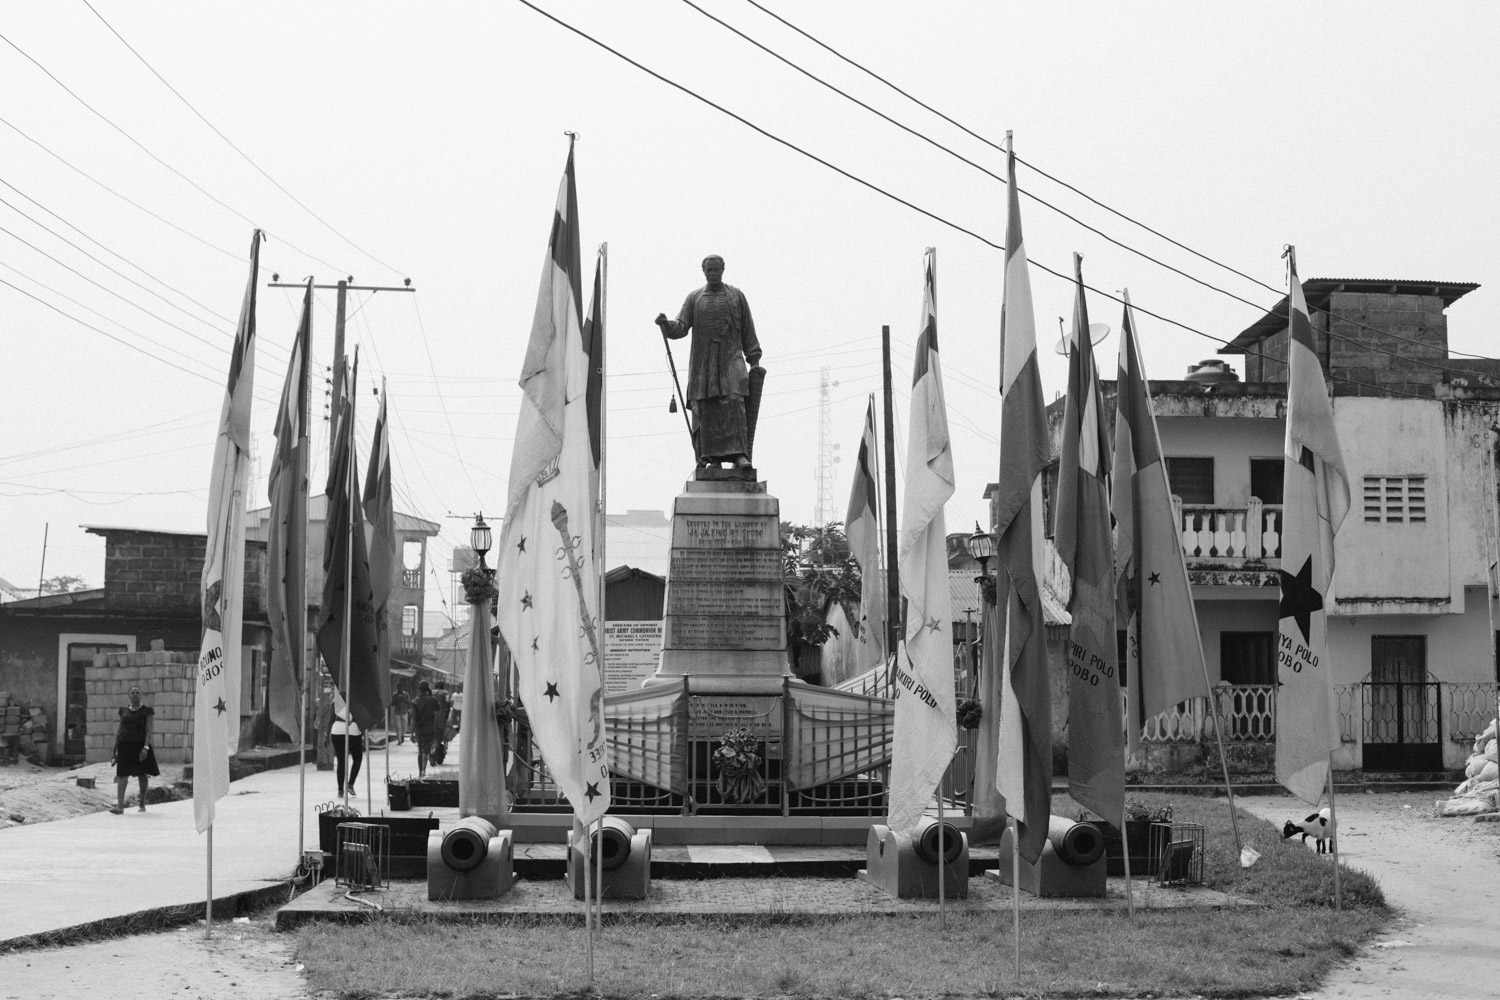 Statue of King Jaja of Opobo showing the flags of the different Compounds or Houses